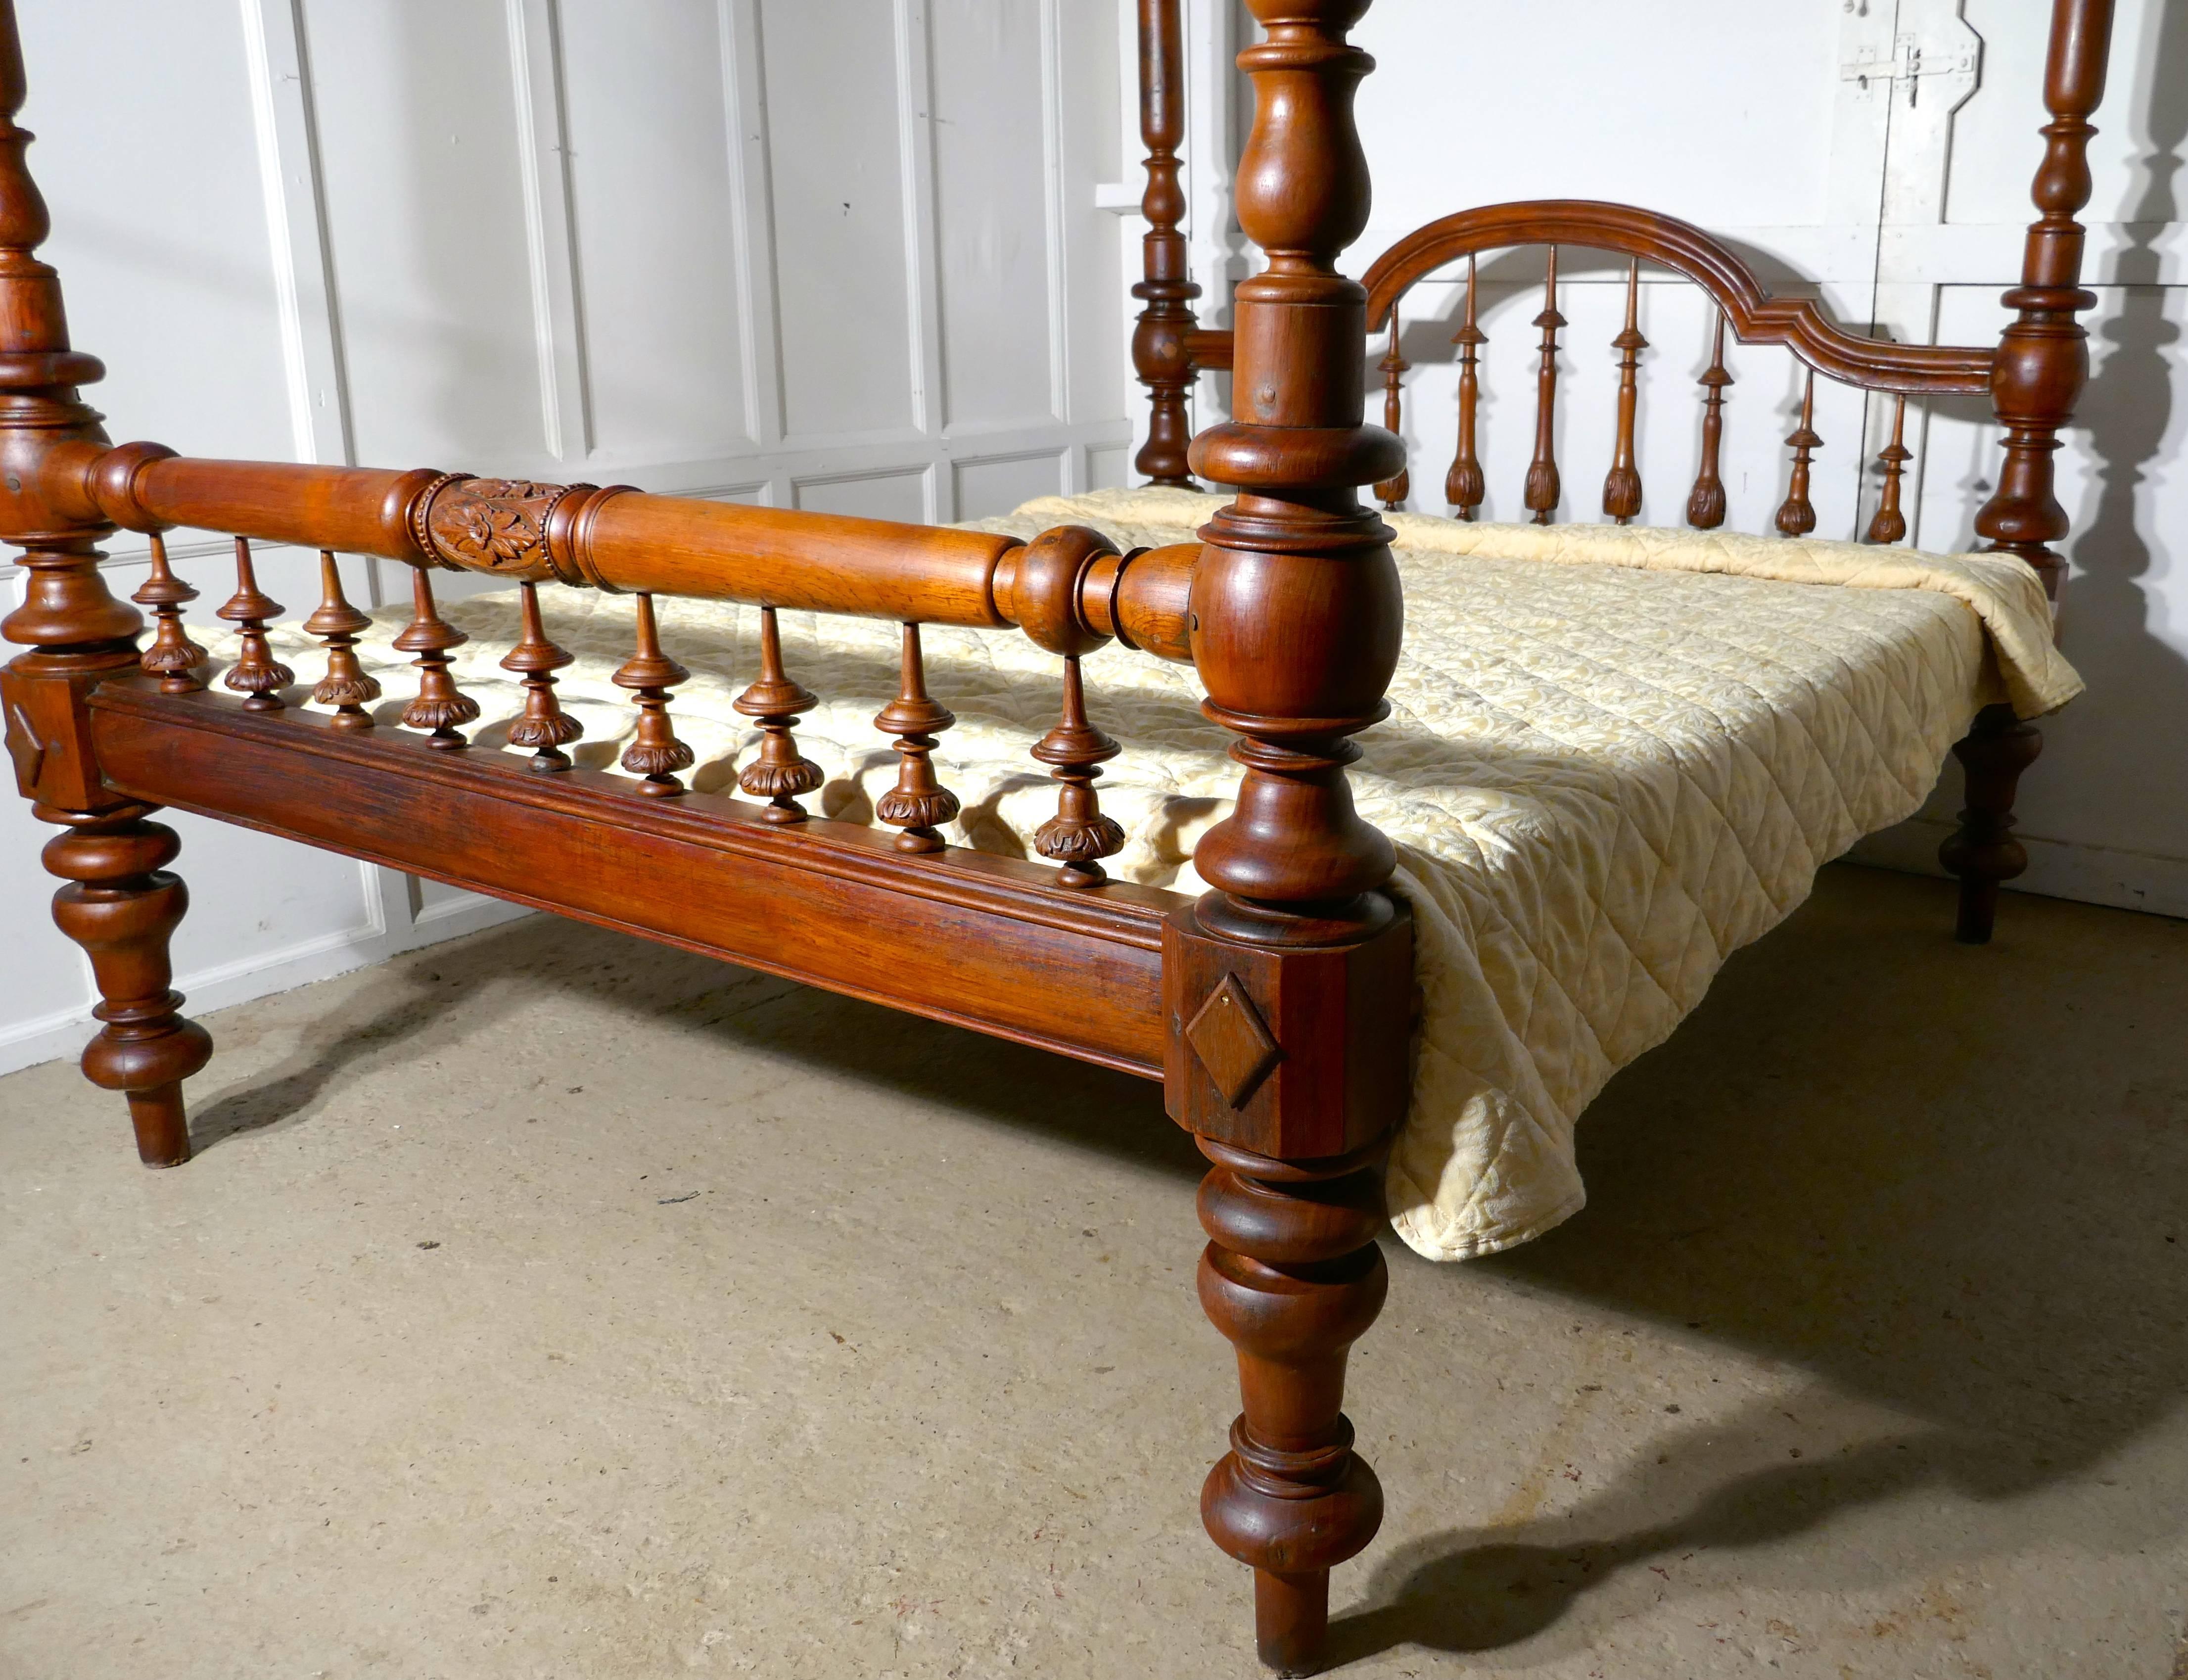 This is a superior quality piece, the bed originates from India often know as a Raj bed, the bed is handmade, it is a four poster with carved turnings and is unusually, a light colour polished wood 
The head of the bed has a pleasant arched shape